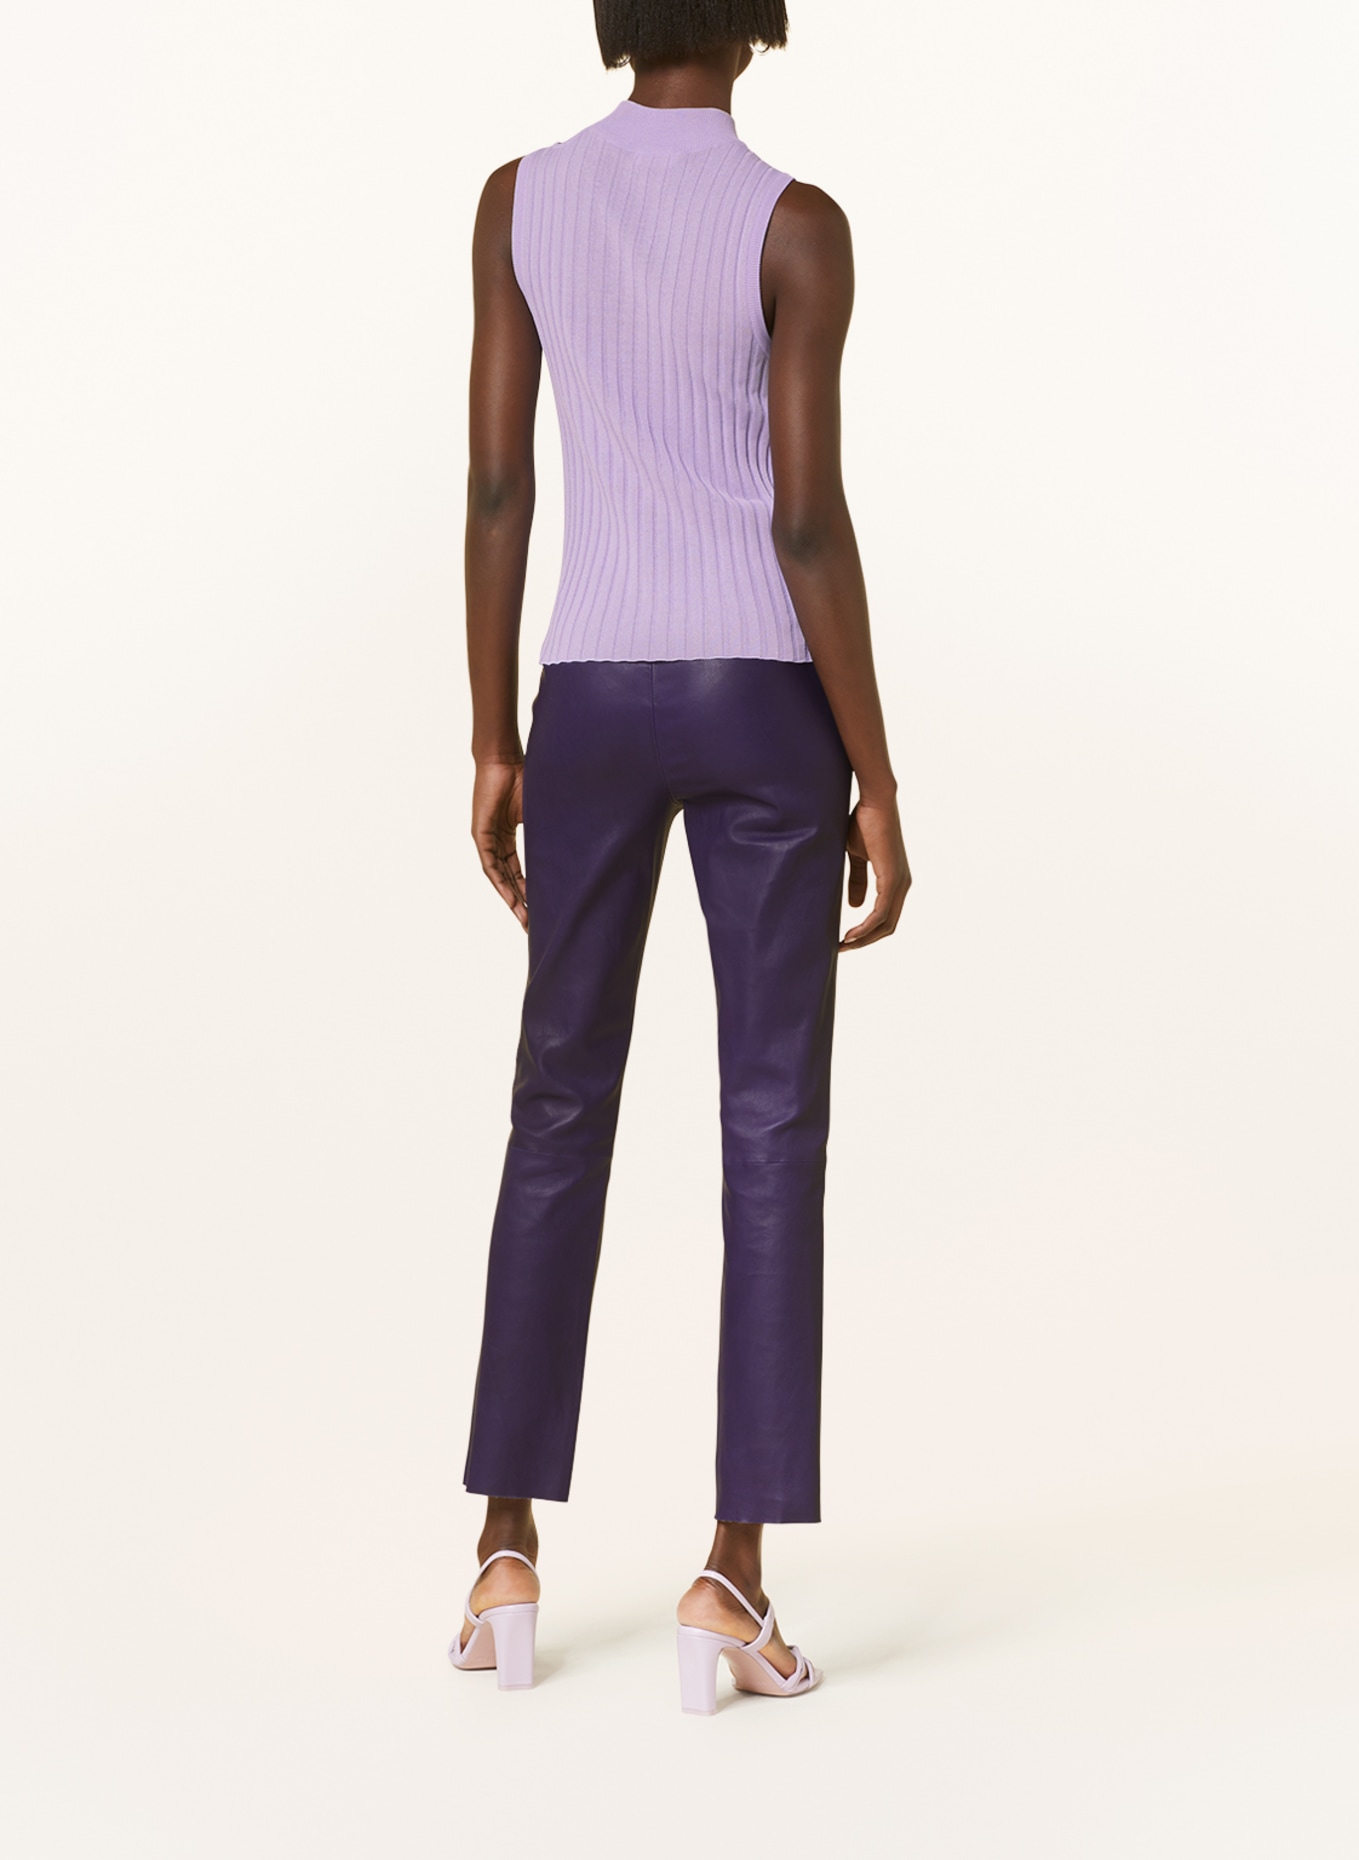 RIANI Knit top with cut-out, Color: LIGHT PURPLE (Image 3)